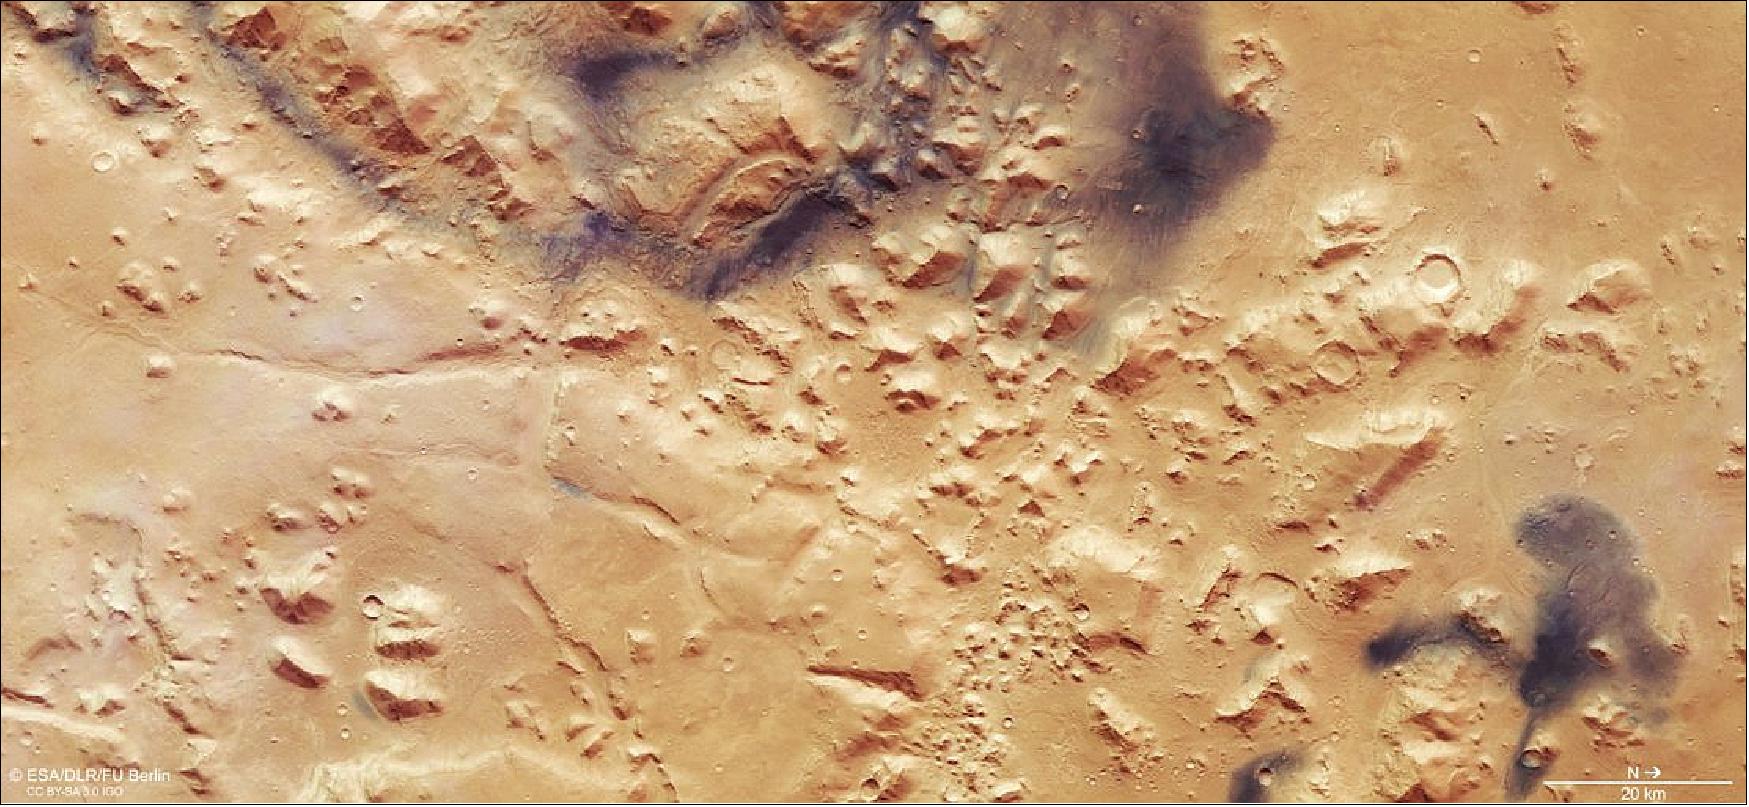 Figure 66: This color view shows the landscape around Nili Fossae, an escarpment sitting between the northern lowlands and southern highlands of Mars. It was created using data from the nadir channel of the HRSC on ESA’s Mars Express orbiter, the field of view which is aligned perpendicular to the surface of Mars, and the camera’s color channels. The data were acquired during spacecraft orbit 17916. The ground resolution is about 18 m/pixel and the images cover a part of the martian surface centered on 78ºE, 28ºN. North is to the right. (image credit: ESA/DLR/FU Berlin, CC BY-SA 3.0 IGO)